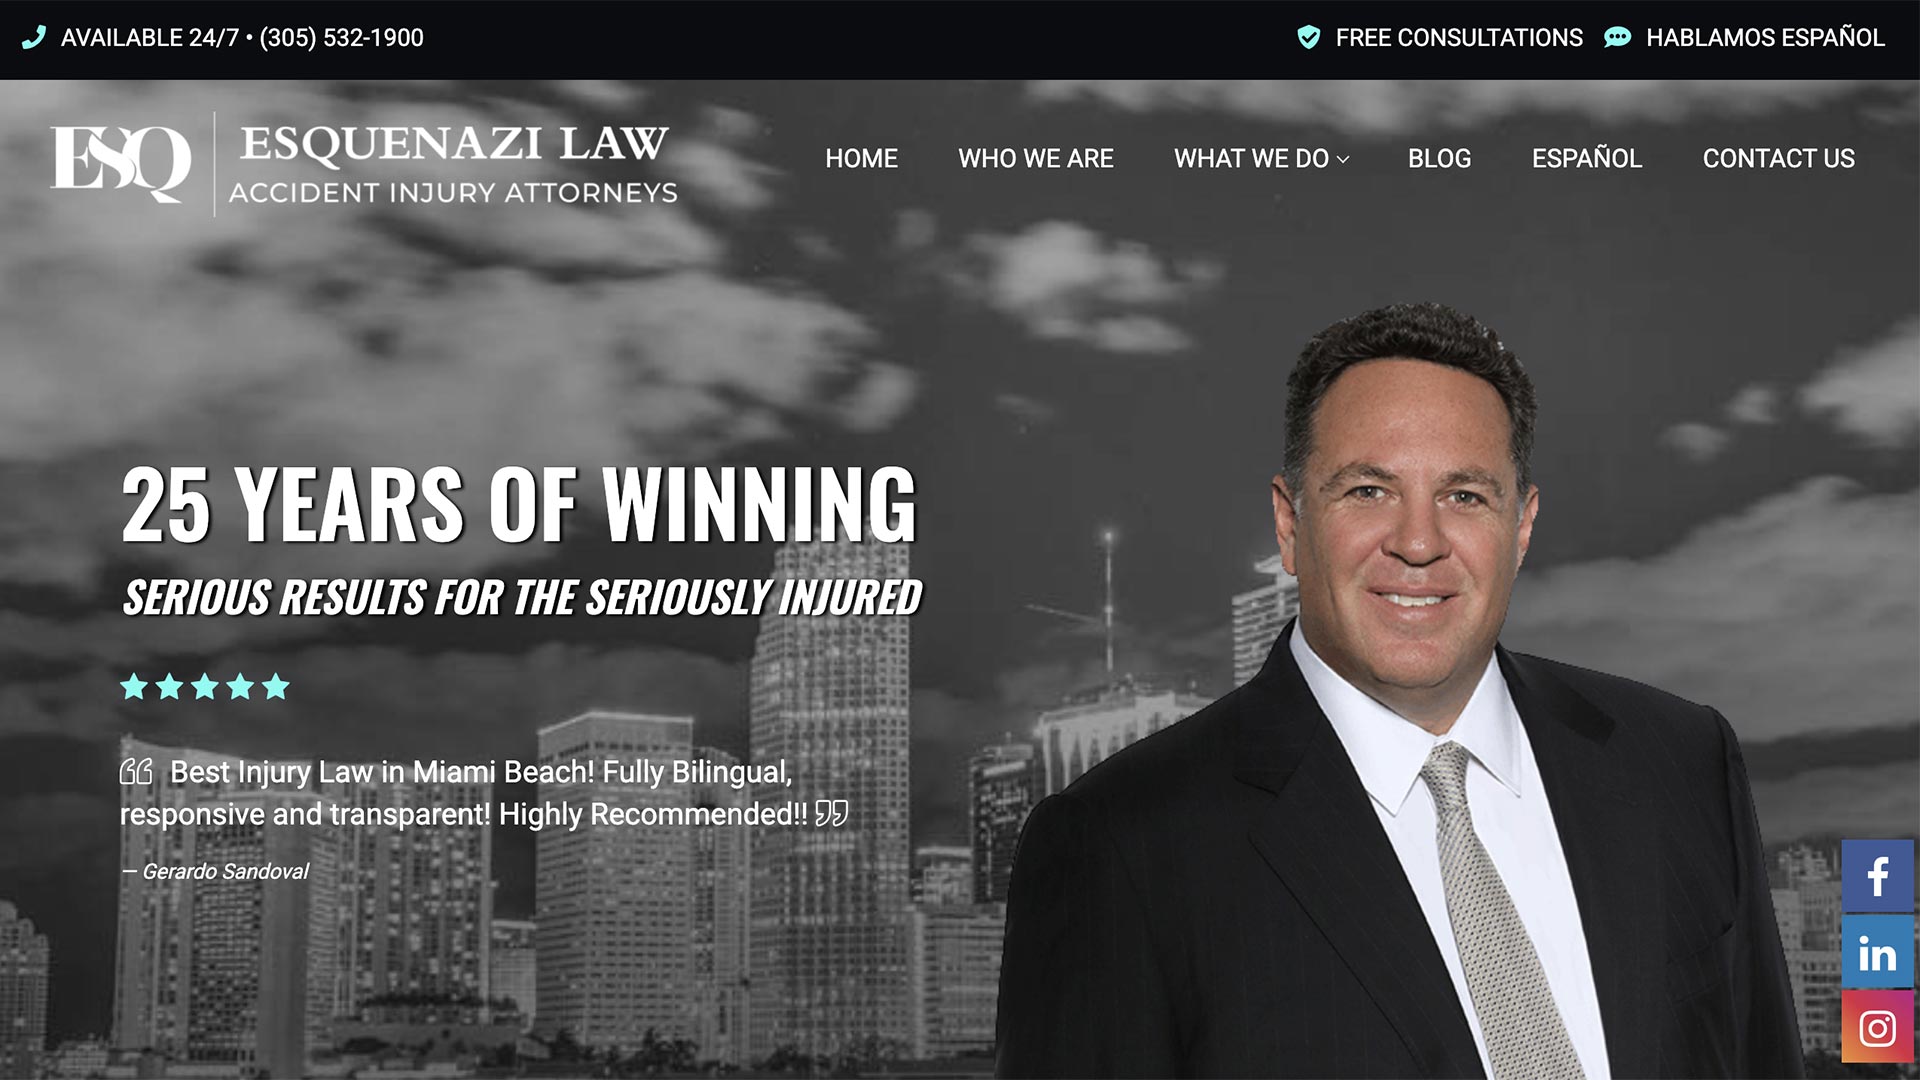 Personal Injury Attorney Website Example: Esquenazi Law